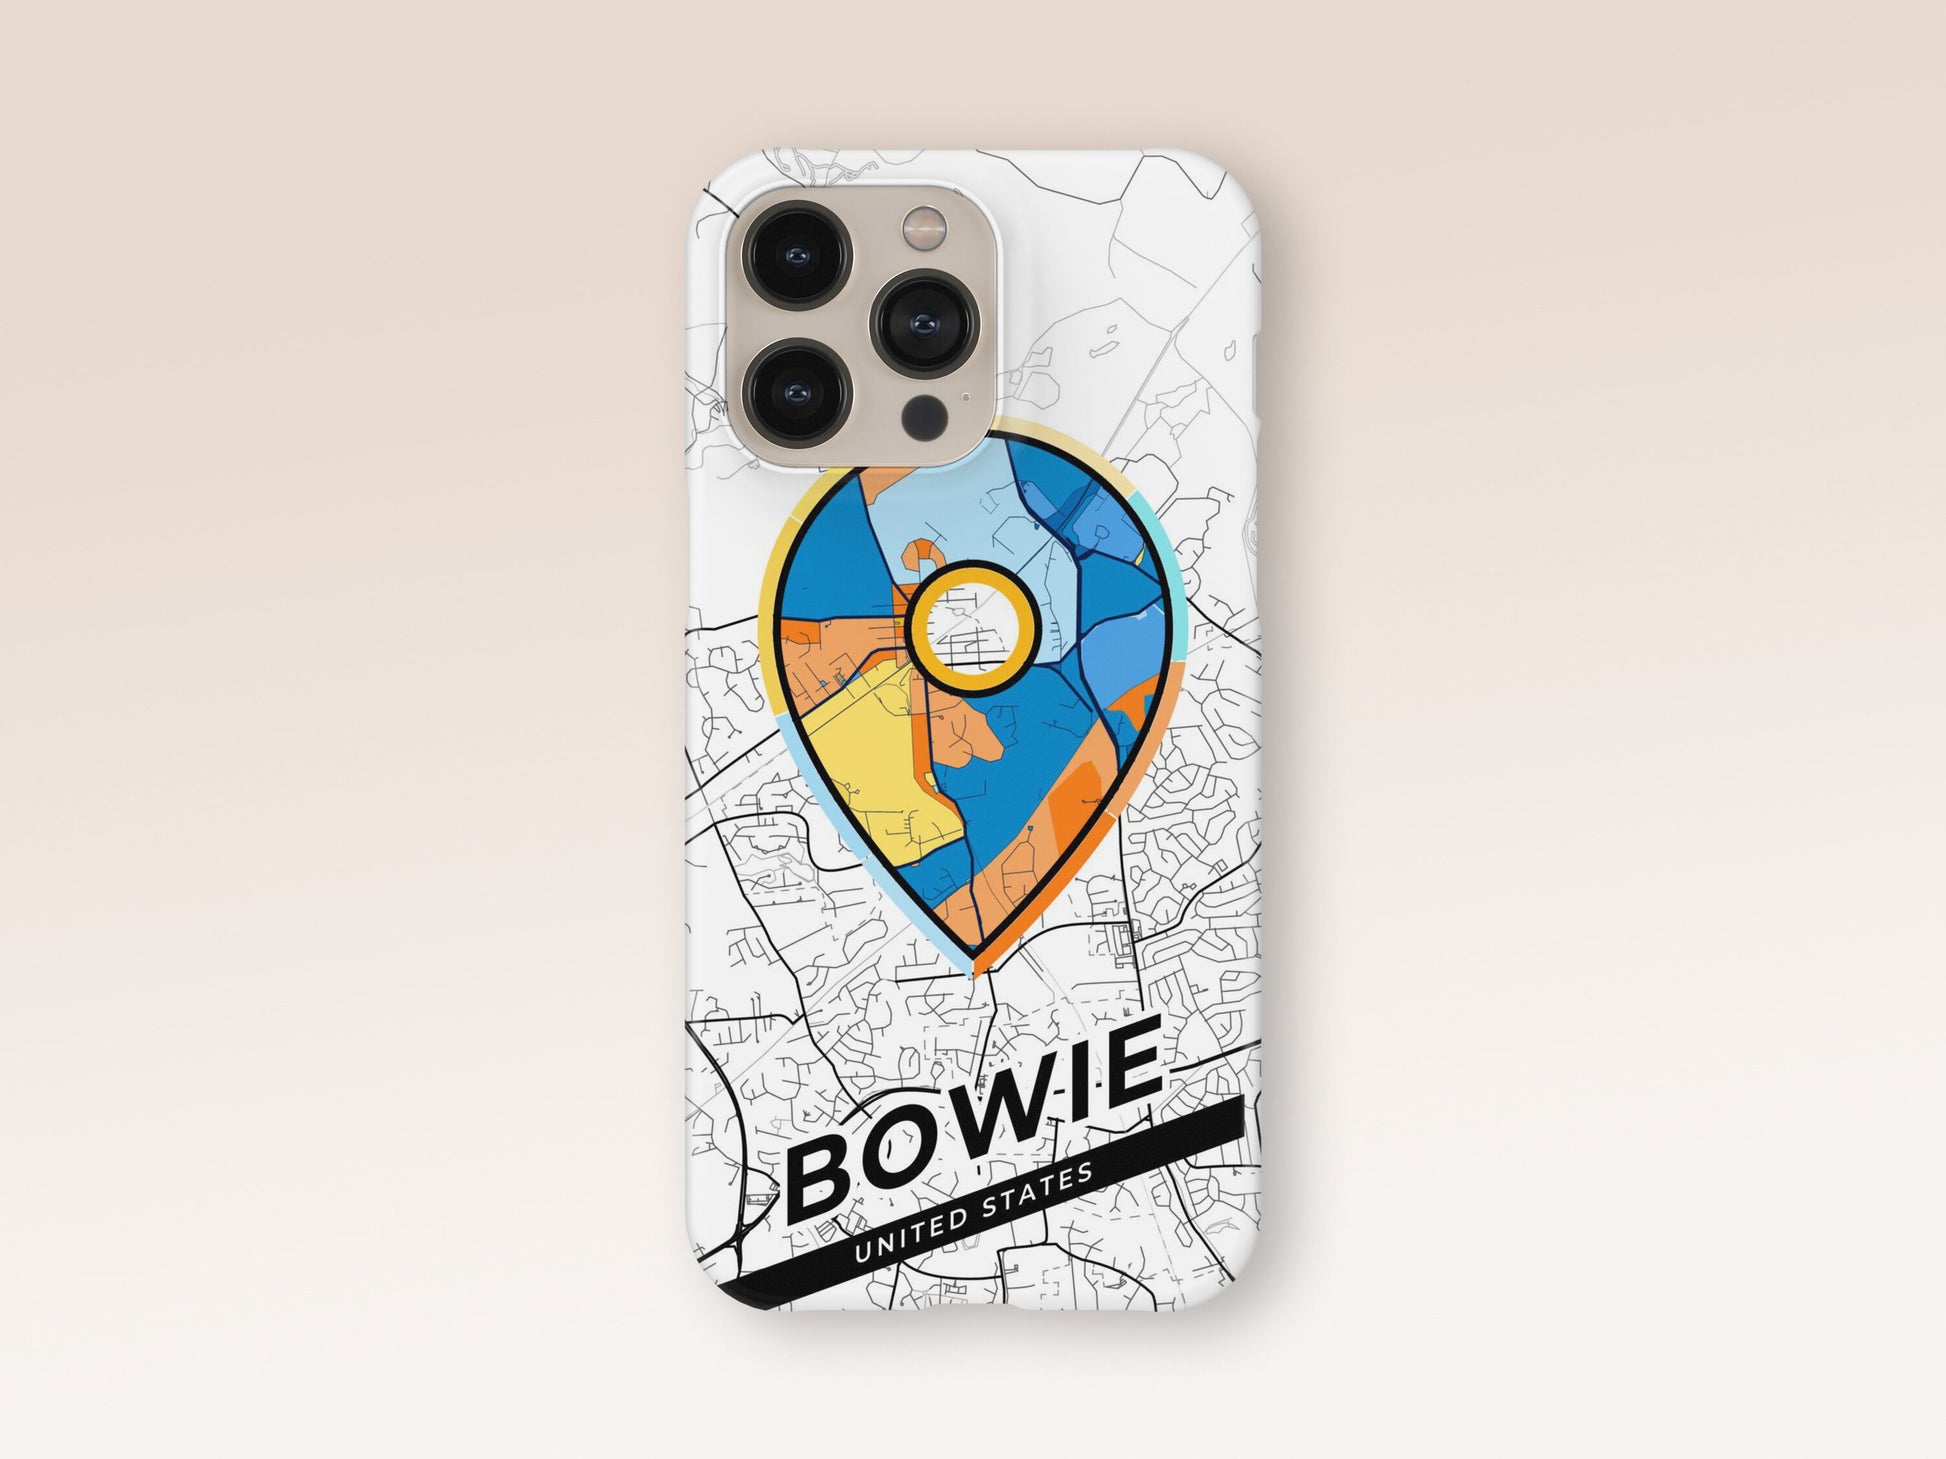 Bowie Maryland slim phone case with colorful icon. Birthday, wedding or housewarming gift. Couple match cases. 1